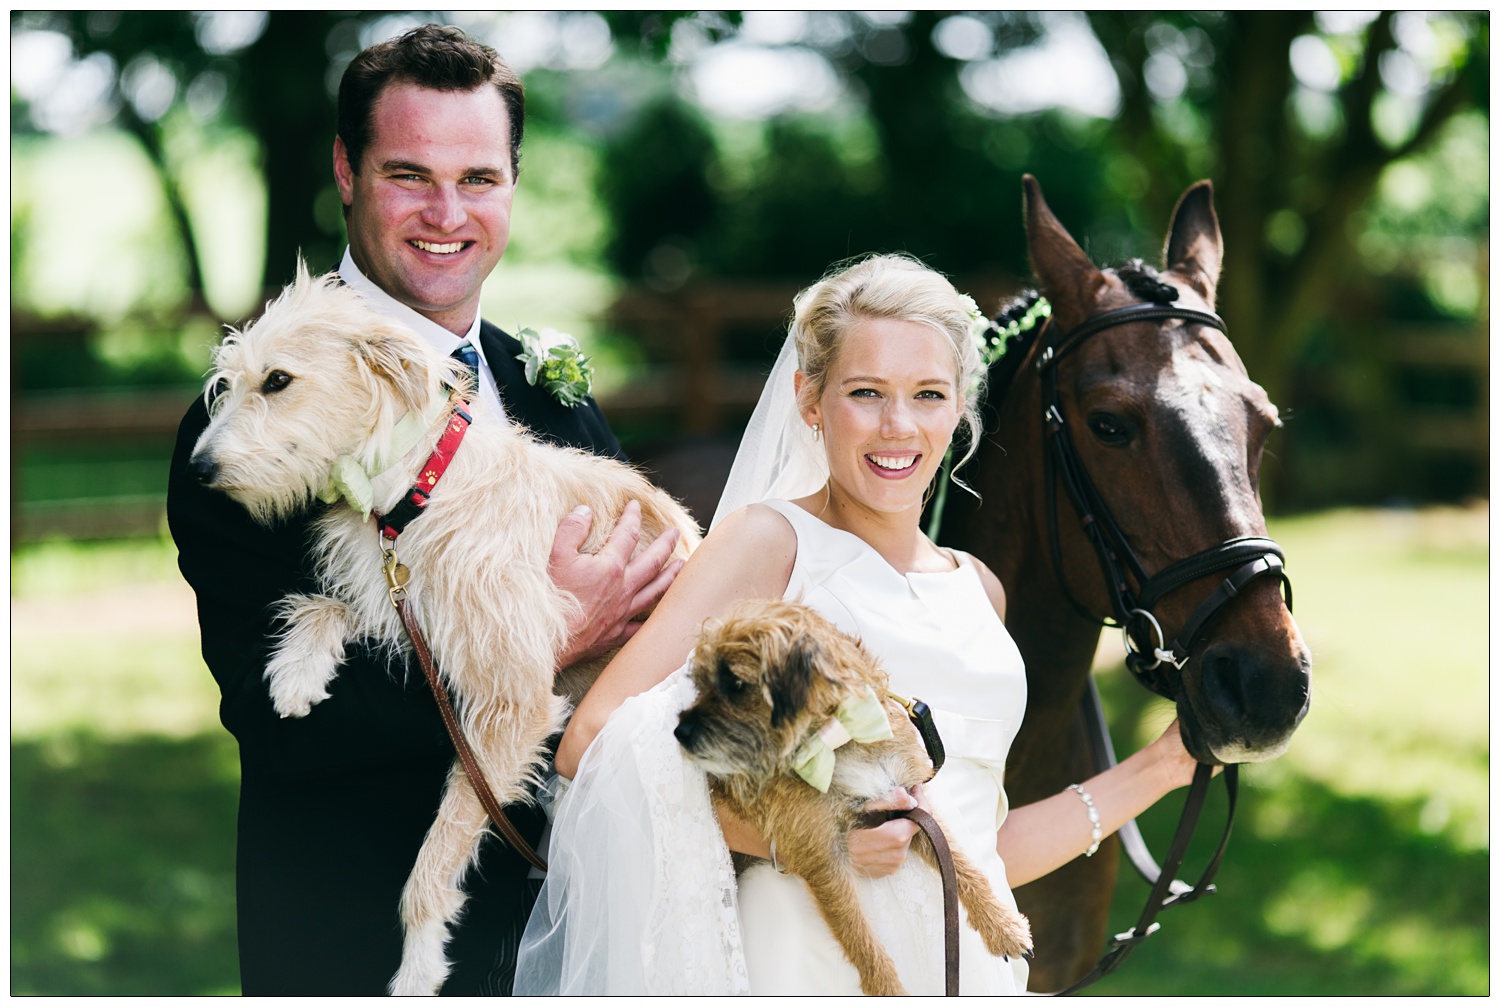 Bride and groom with their dogs and a horse.